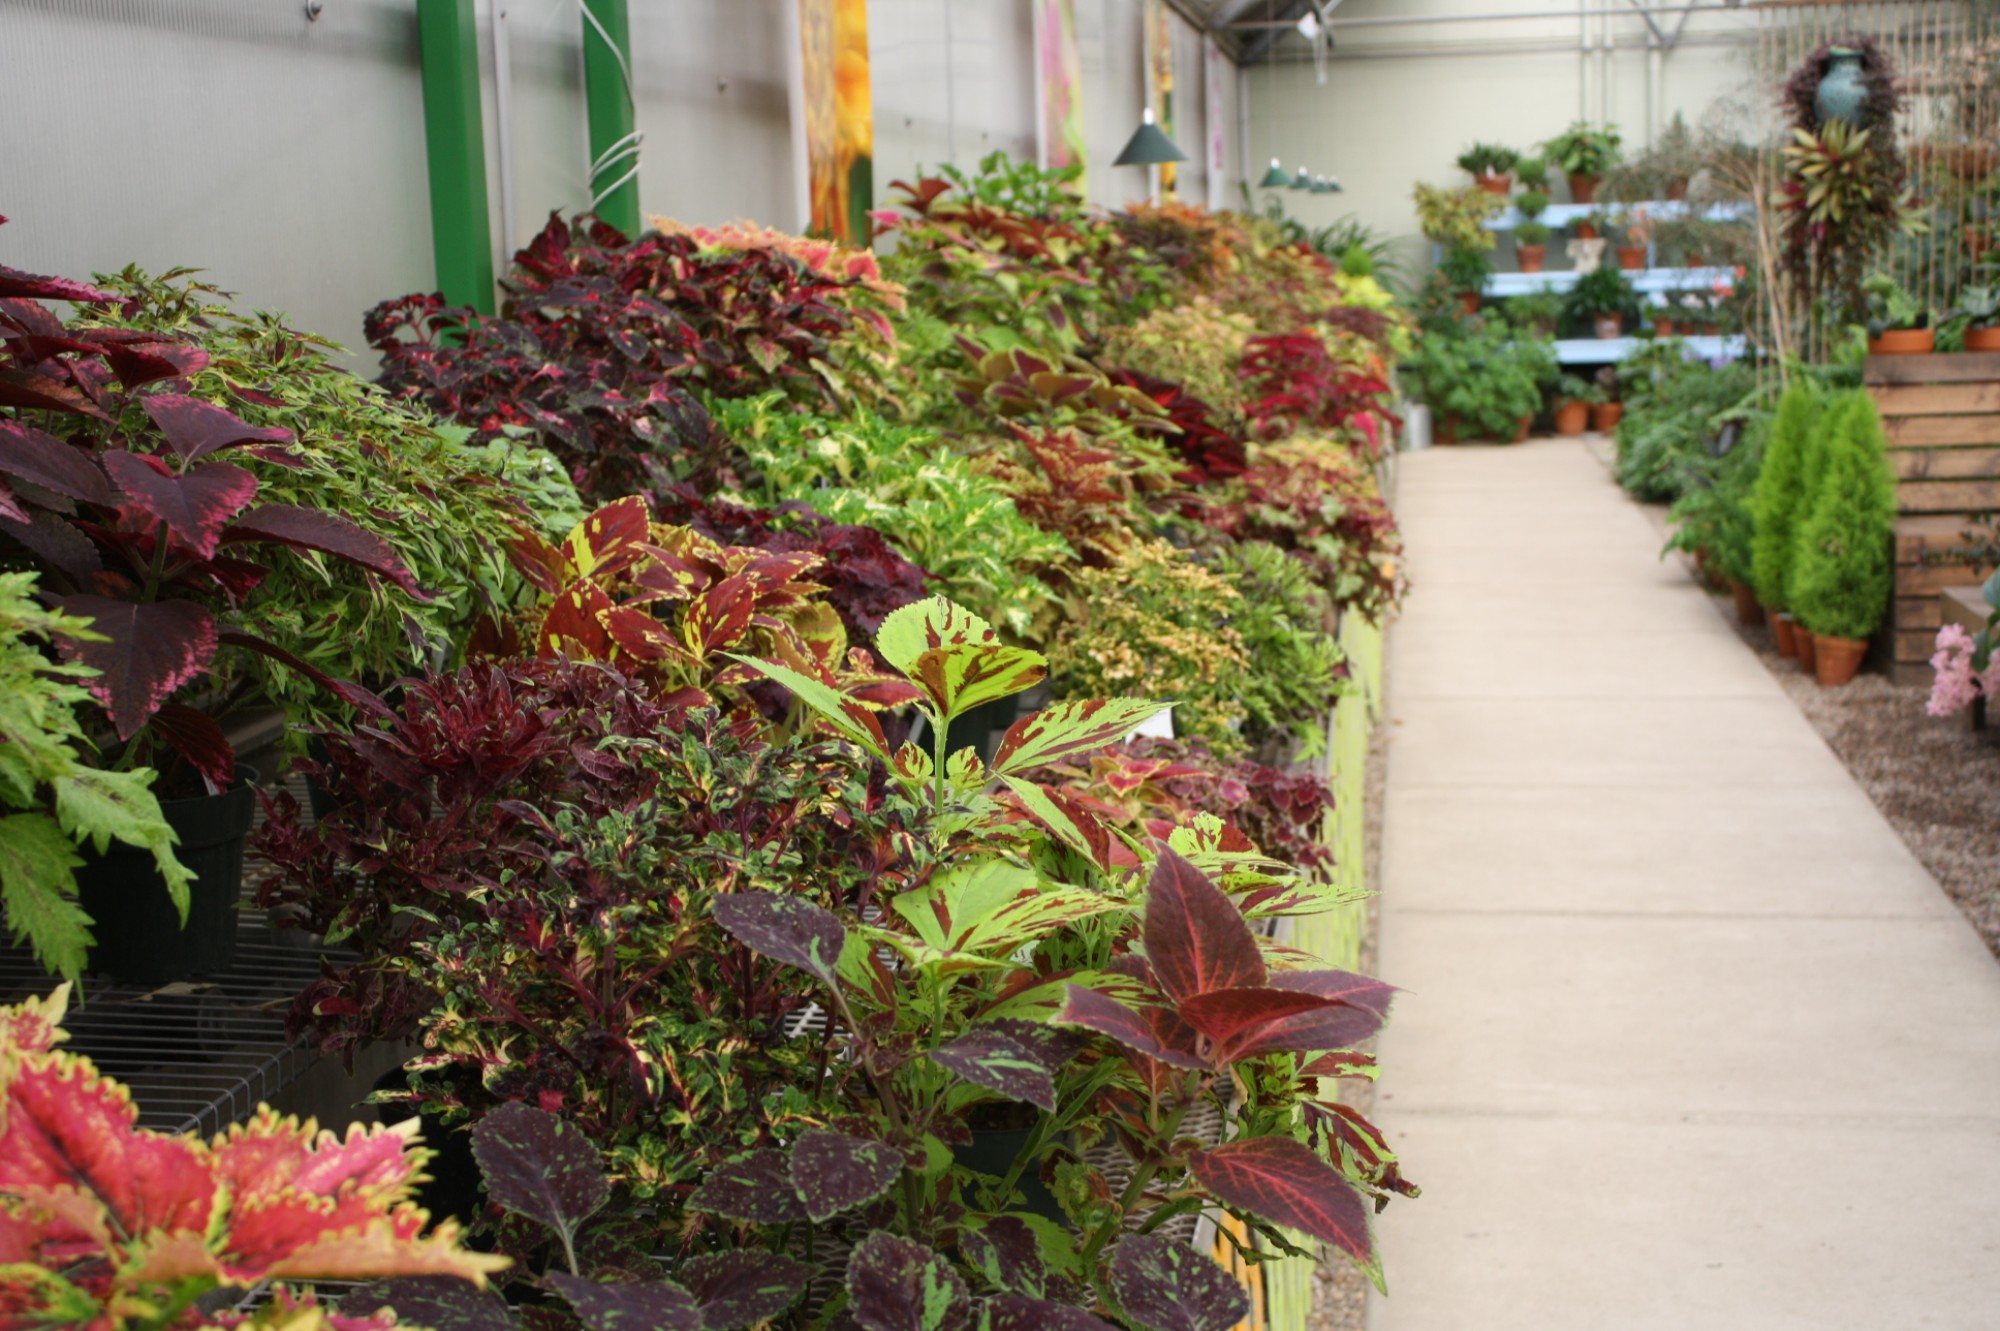 The coleus display collection in the Gardeners Show House, May 2016. Photo by Kelly Norris.